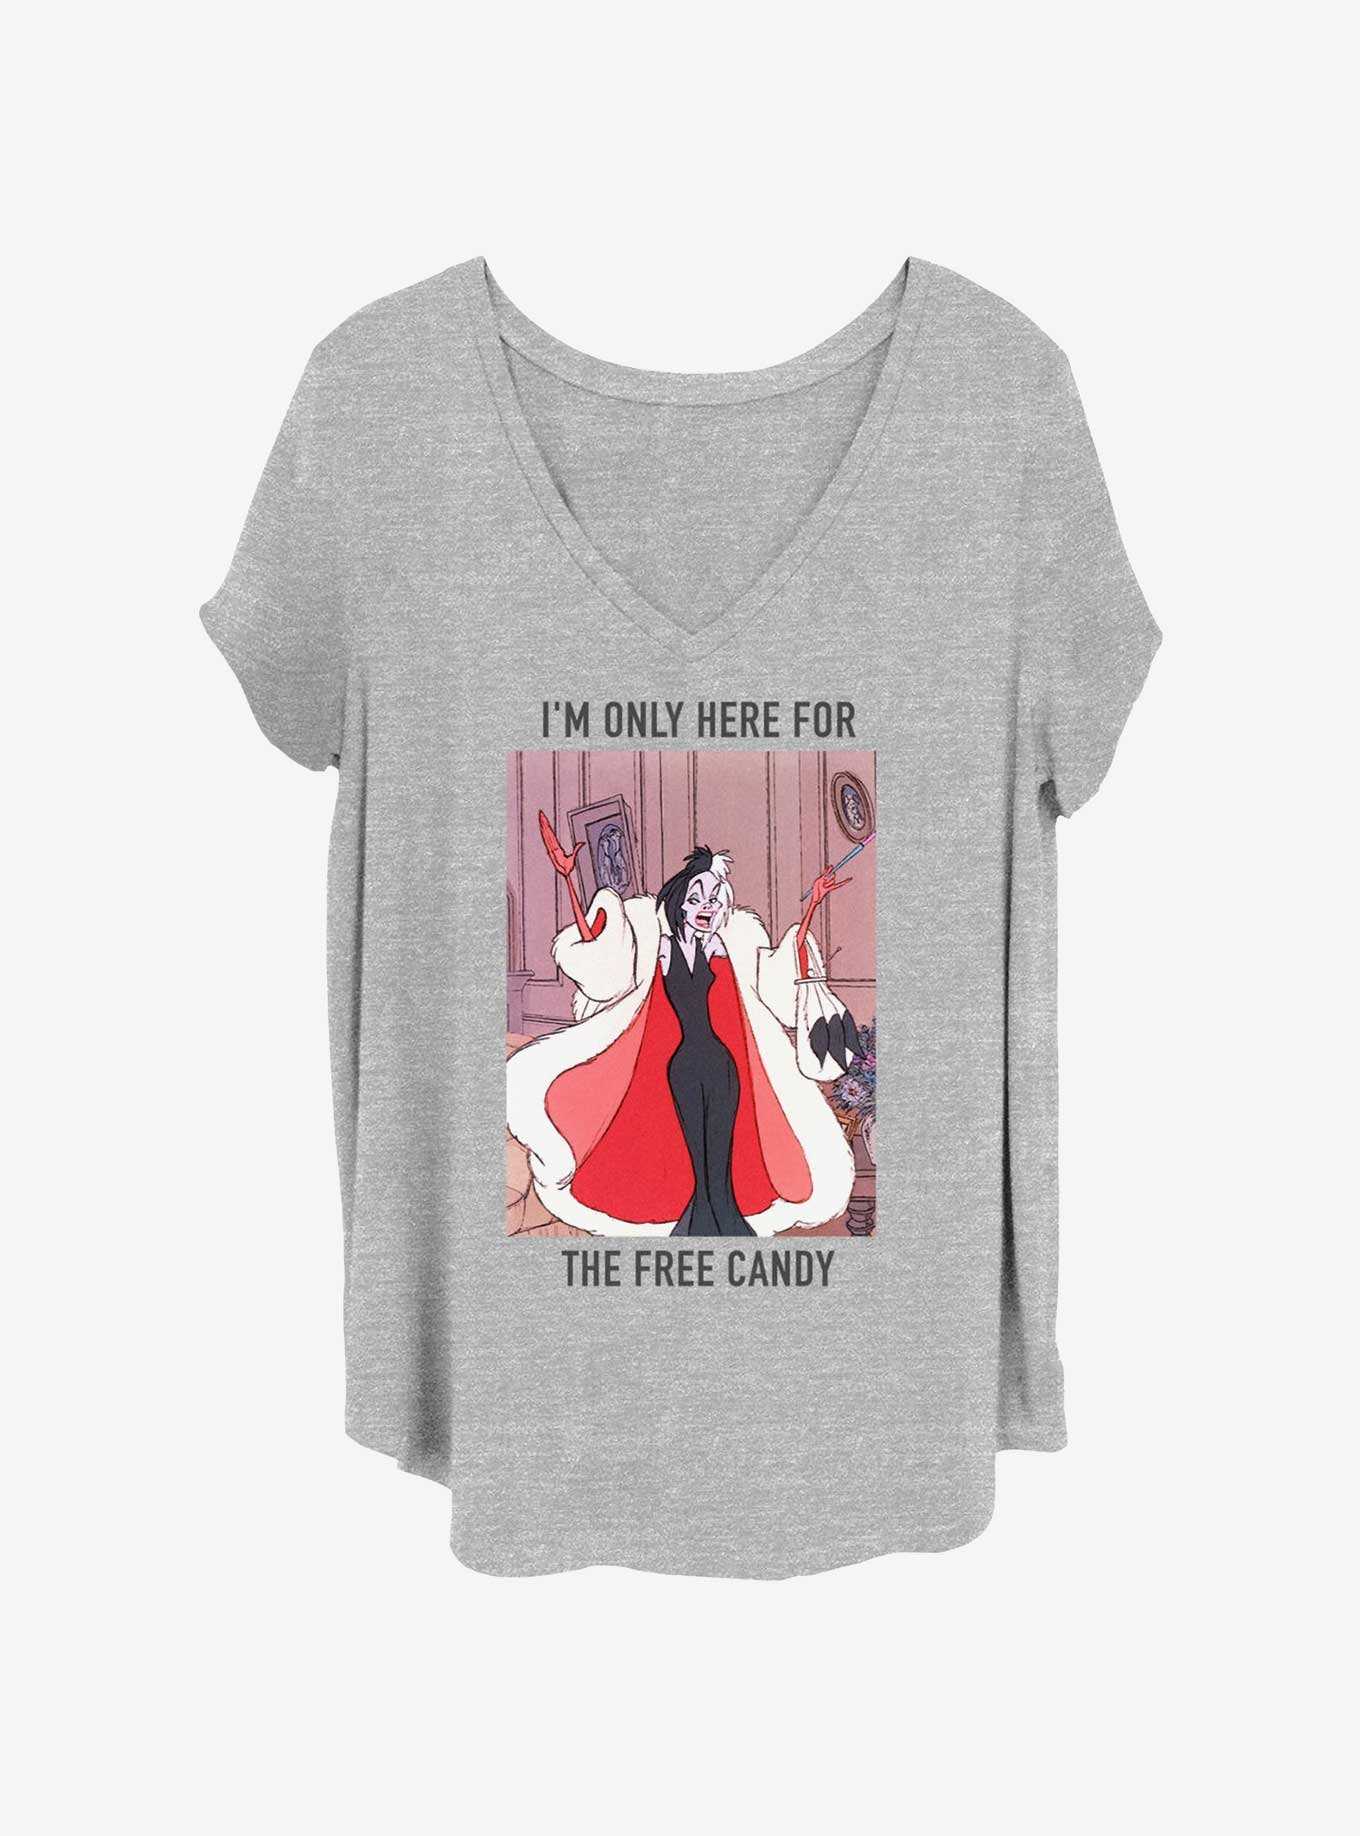 Disney 101 Dalmatians Cruella Only Here For Free Candy Girls T-Shirt Plus Size, , hi-res